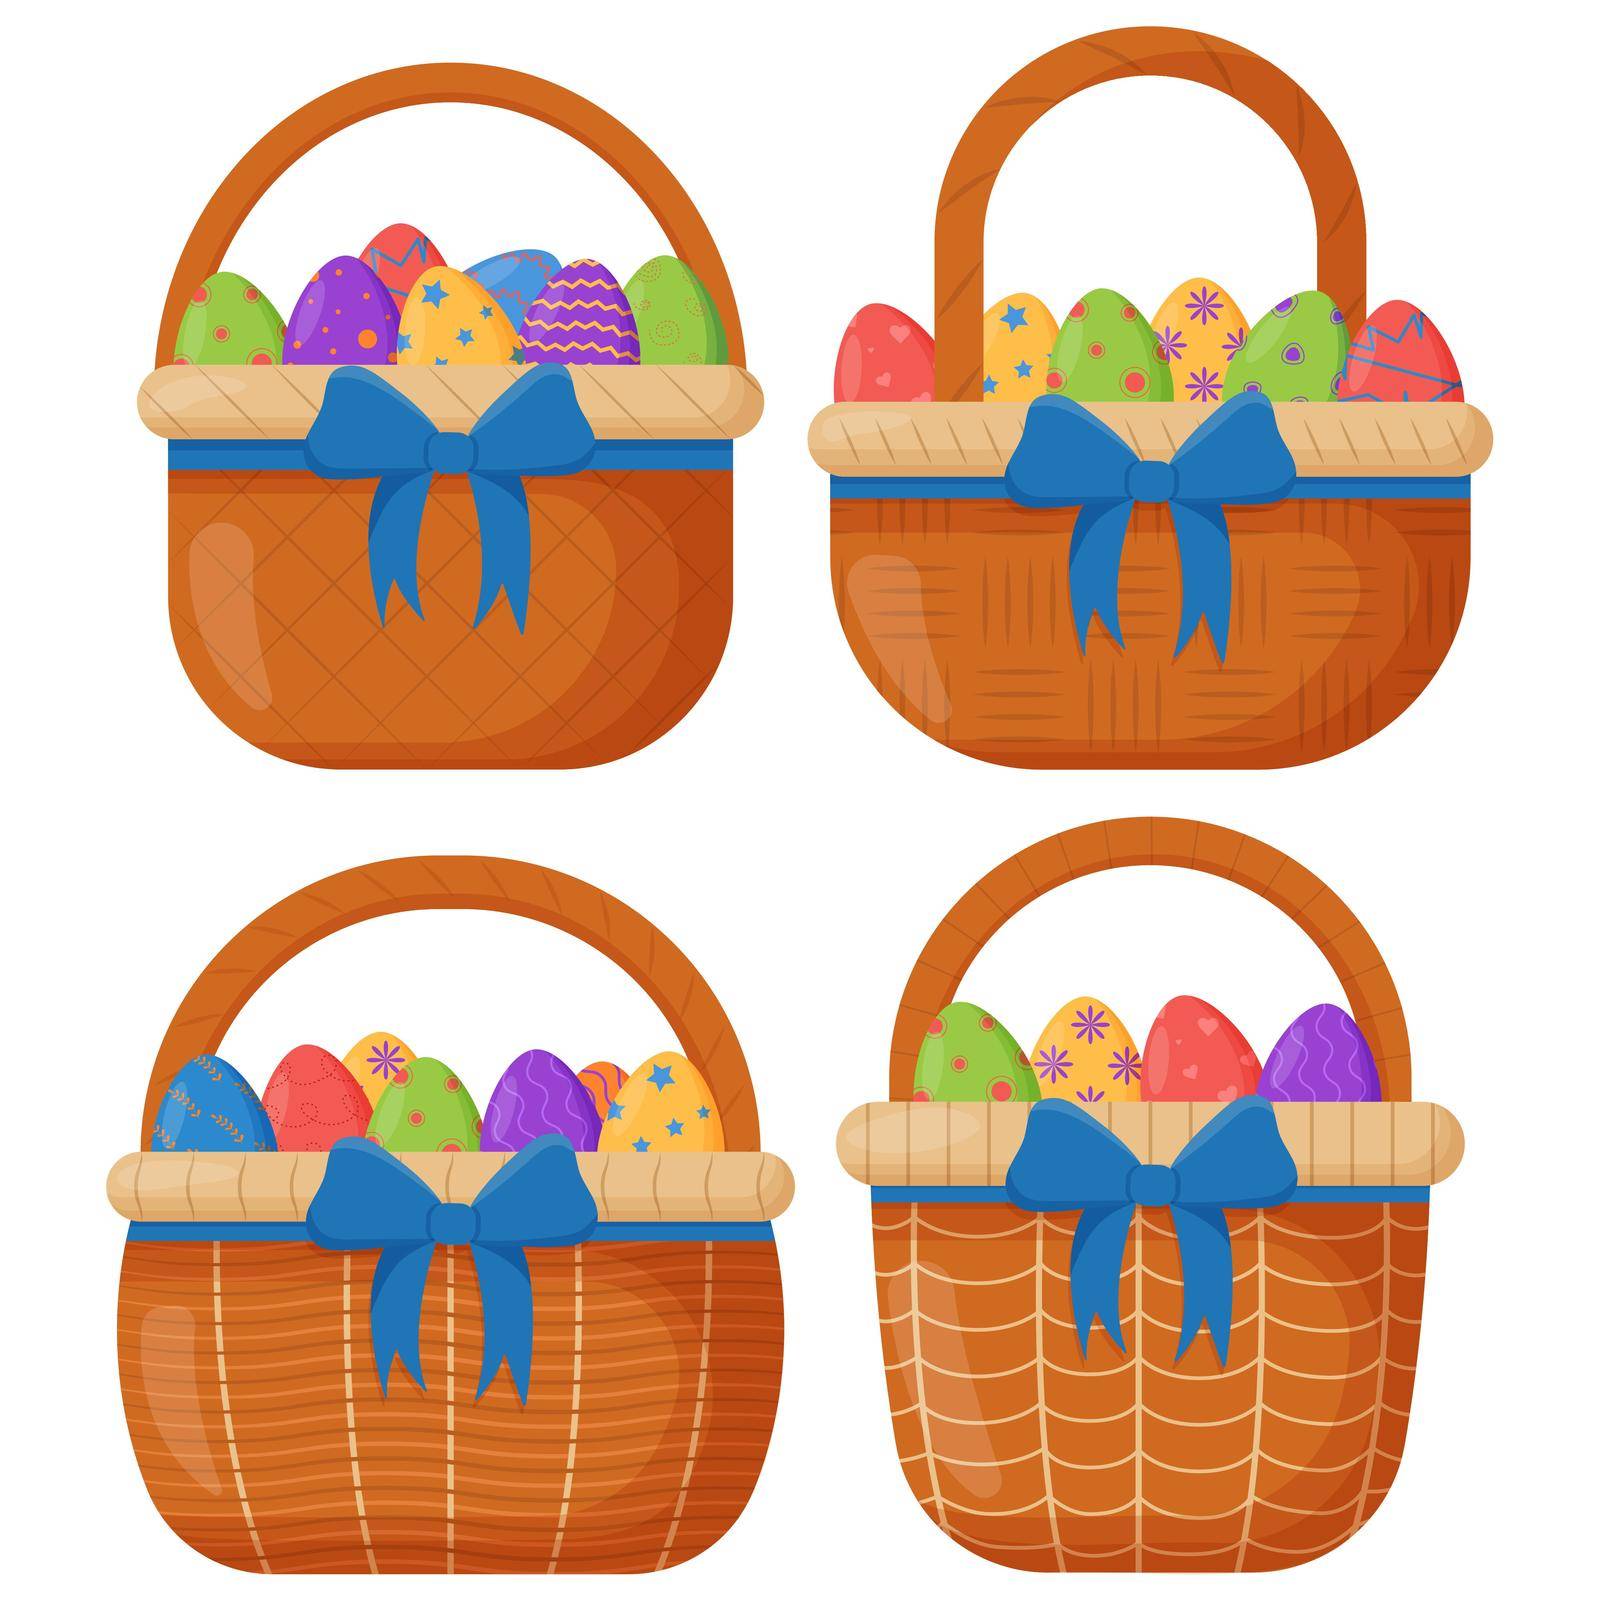 Wicker basket. Wicker basket with Easter eggs for Easter. Wooden accessory for storage or carrying.